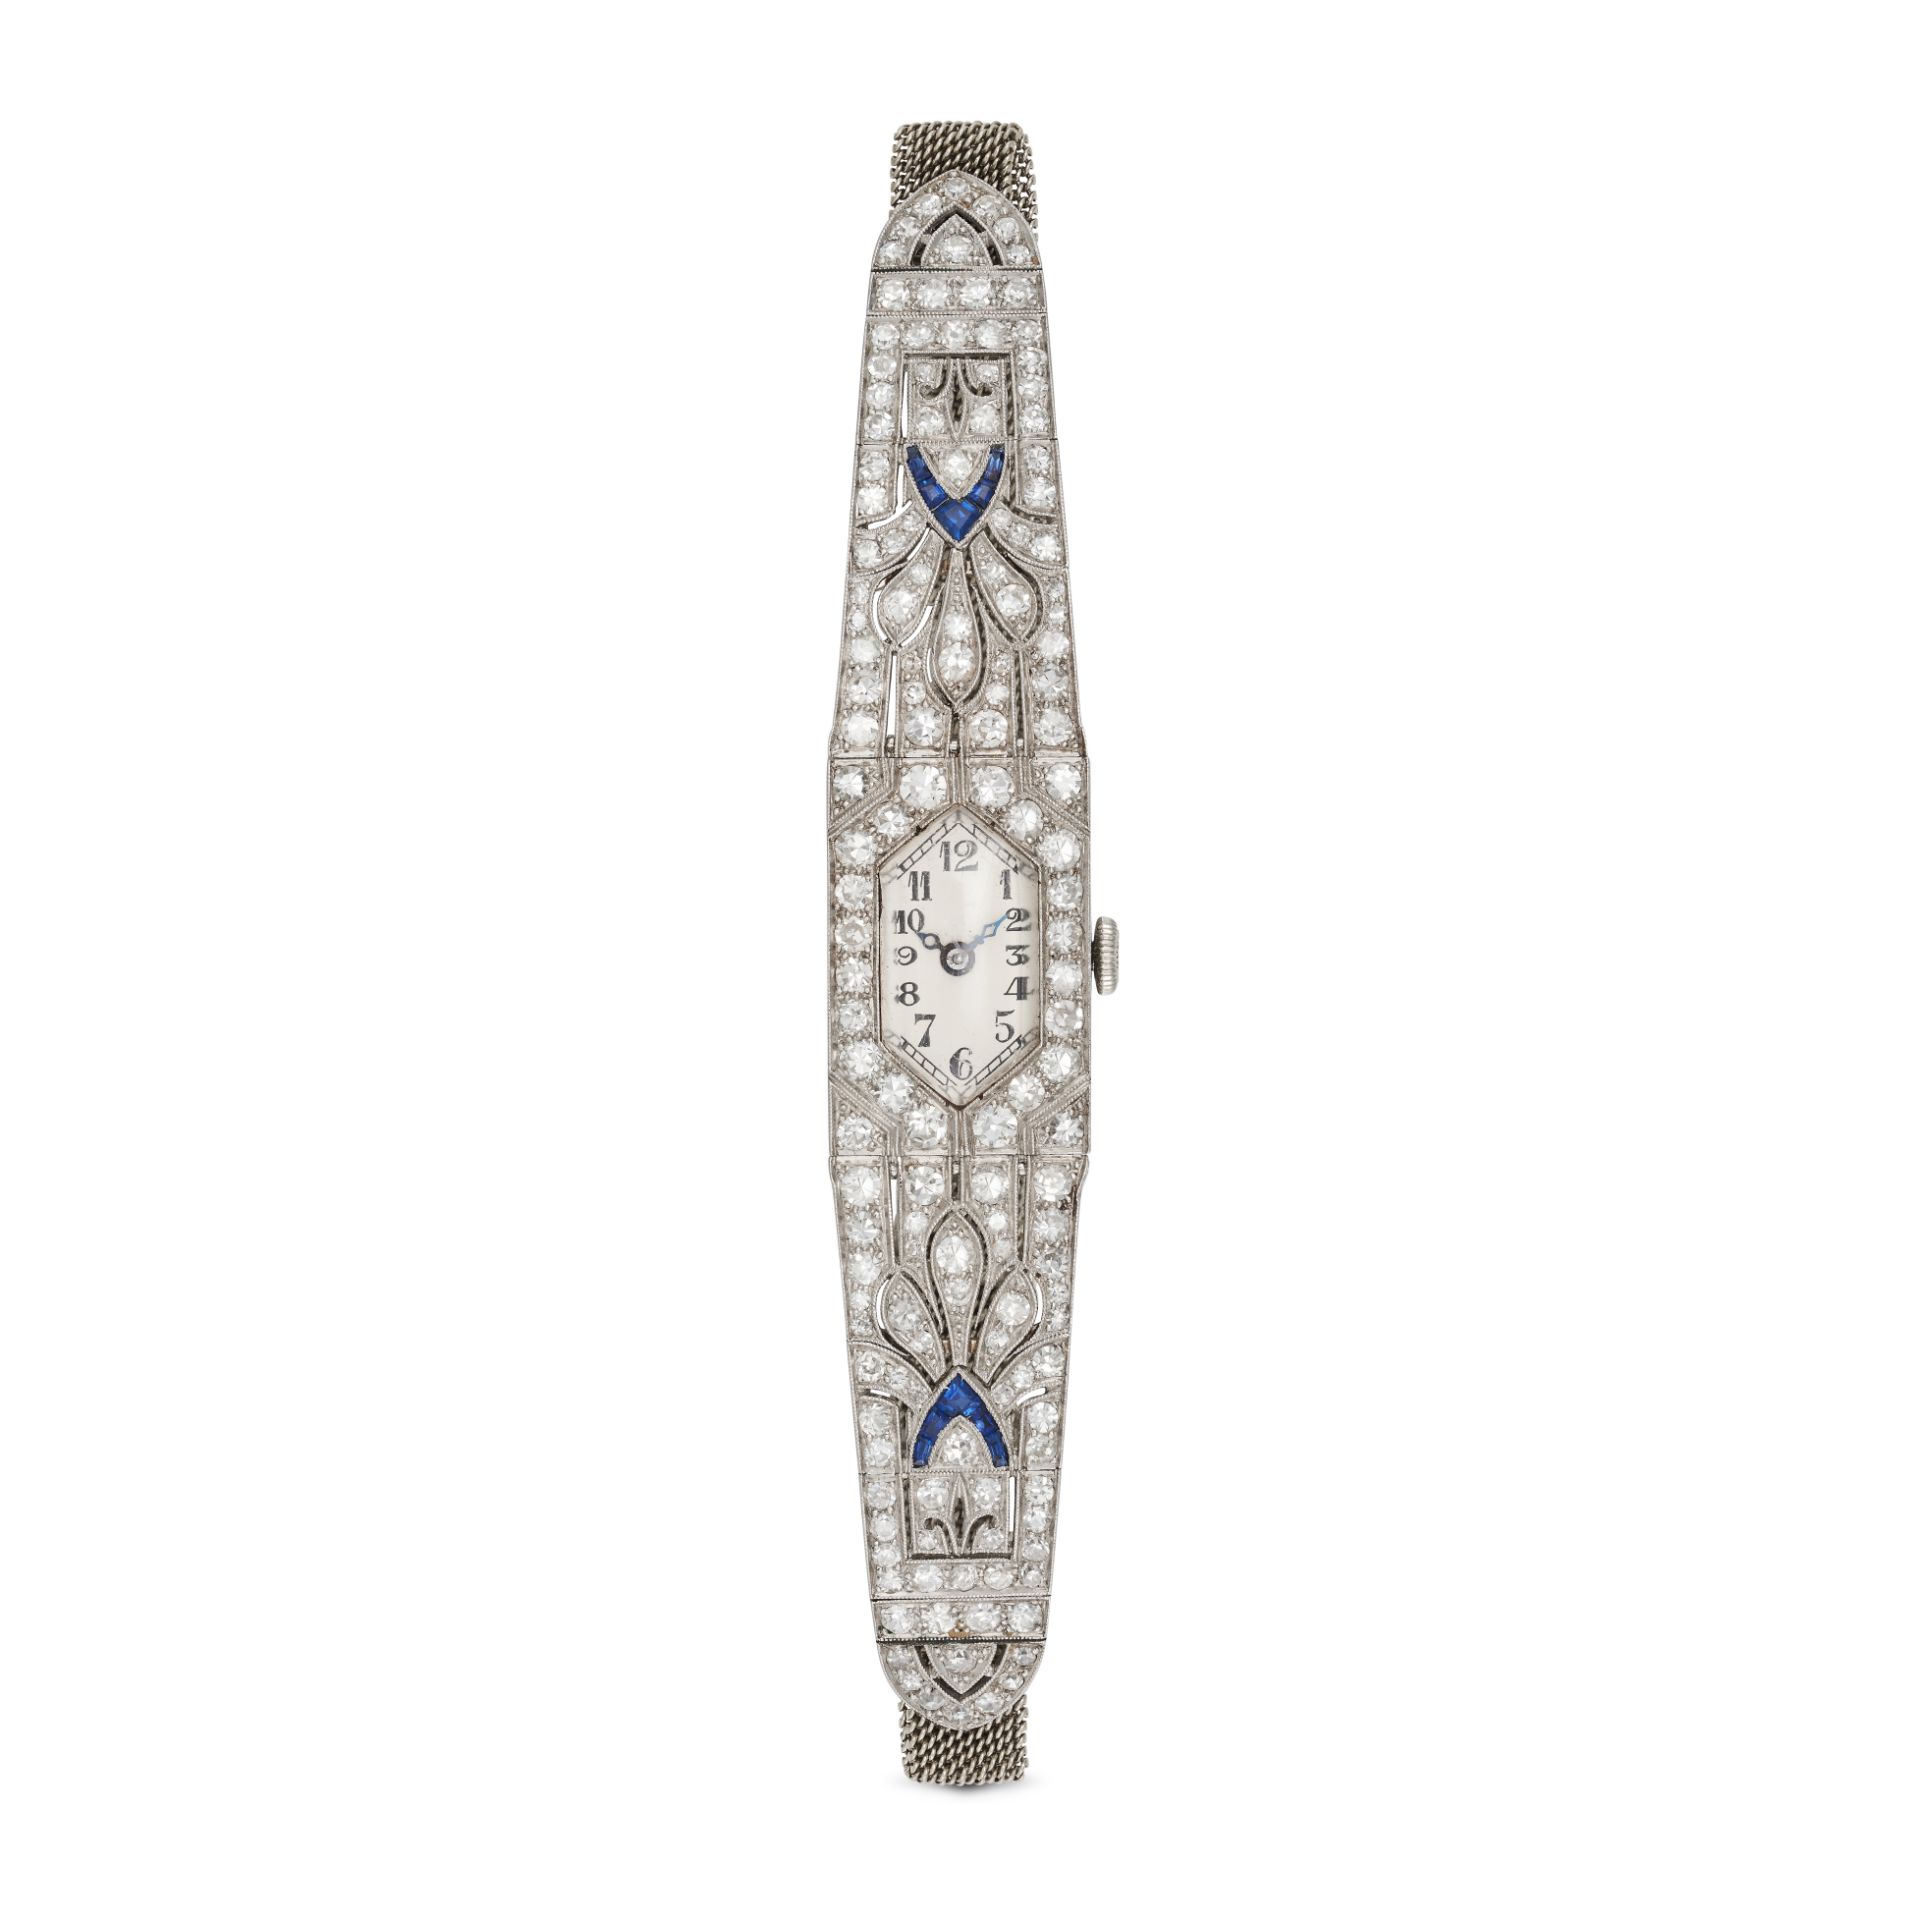 AN ART DECO SAPPHIRE AND DIAMOND COCKTAIL WATCH in platinum, the hexagonal watch face accented by... - Image 2 of 2